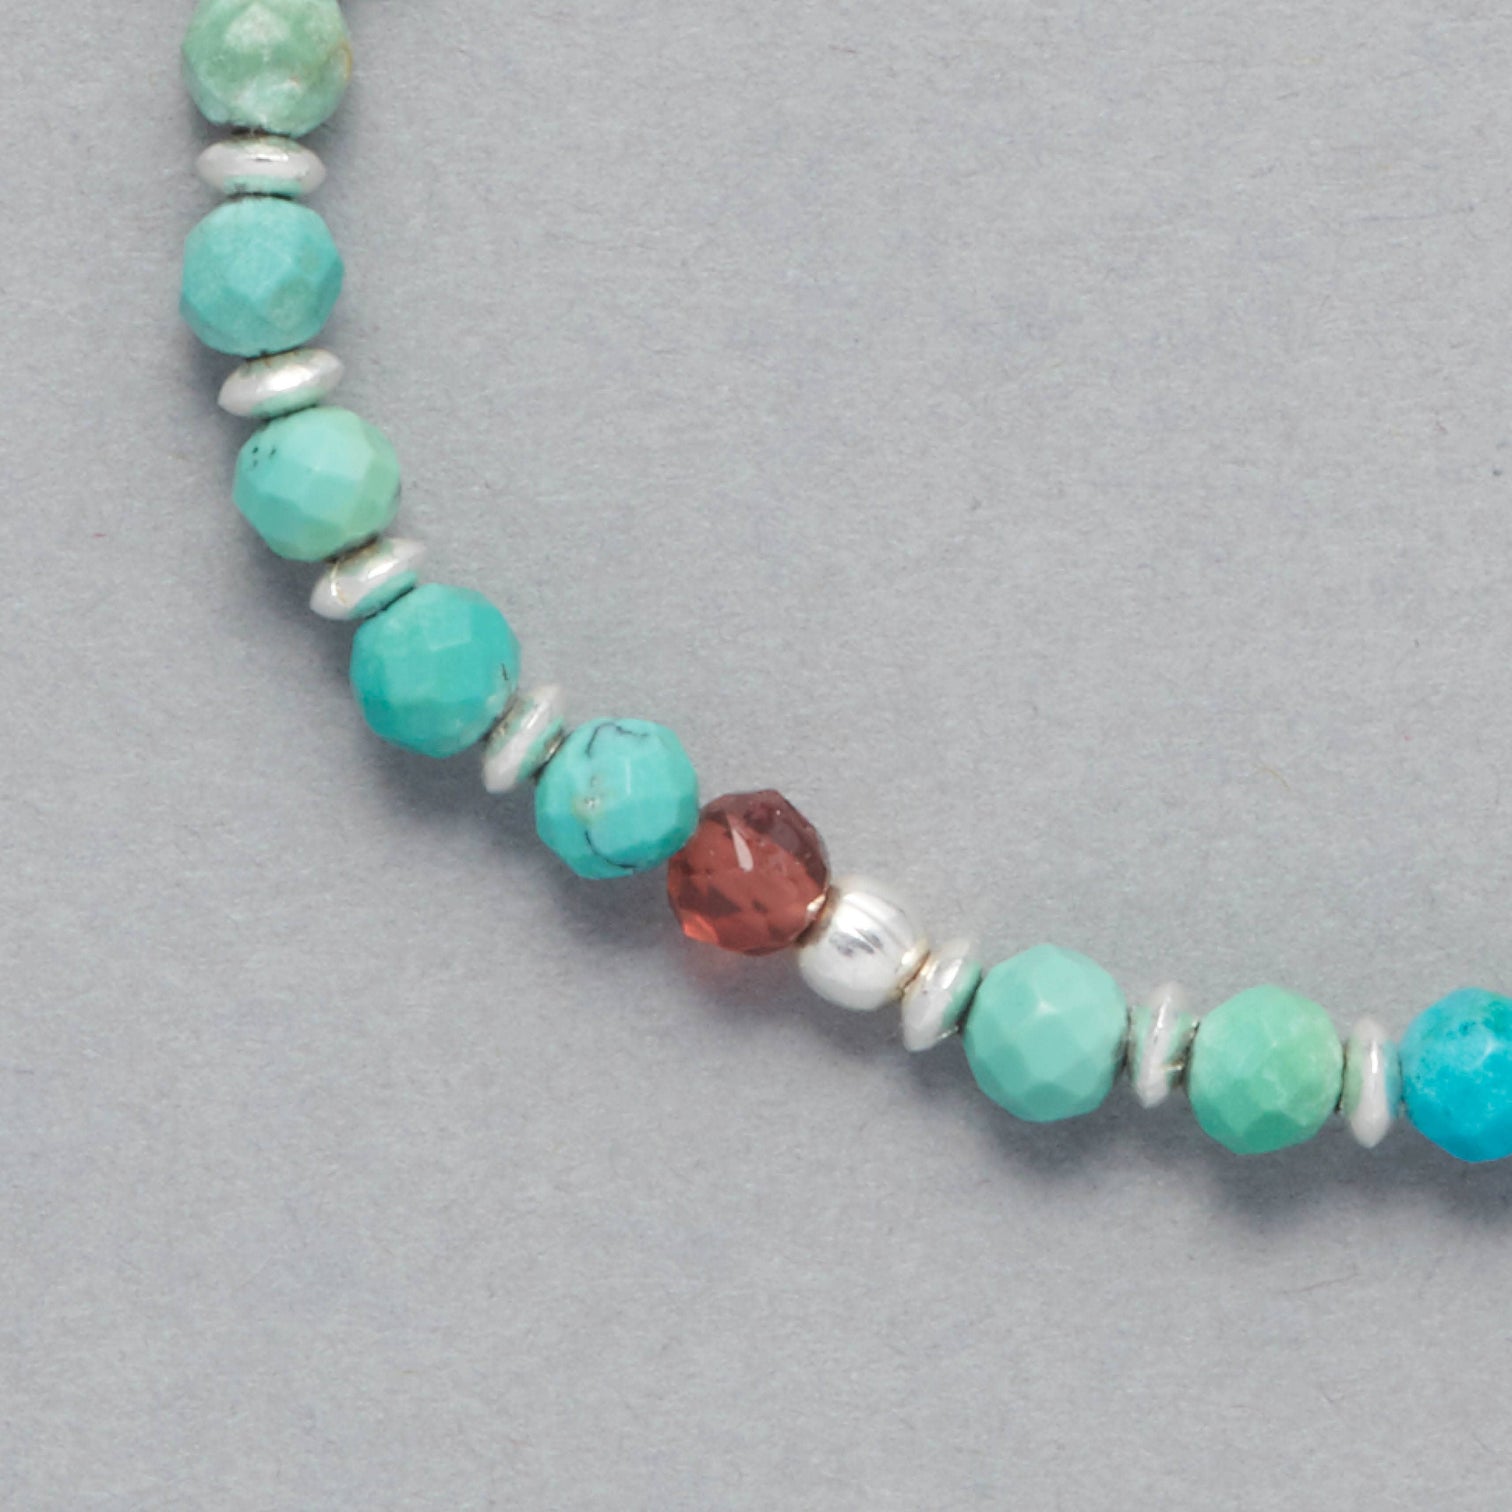 Detail shot of the Kya Bracelet made with faceted Turquoise, faceted Garnet and Sterling Silver Elements. 